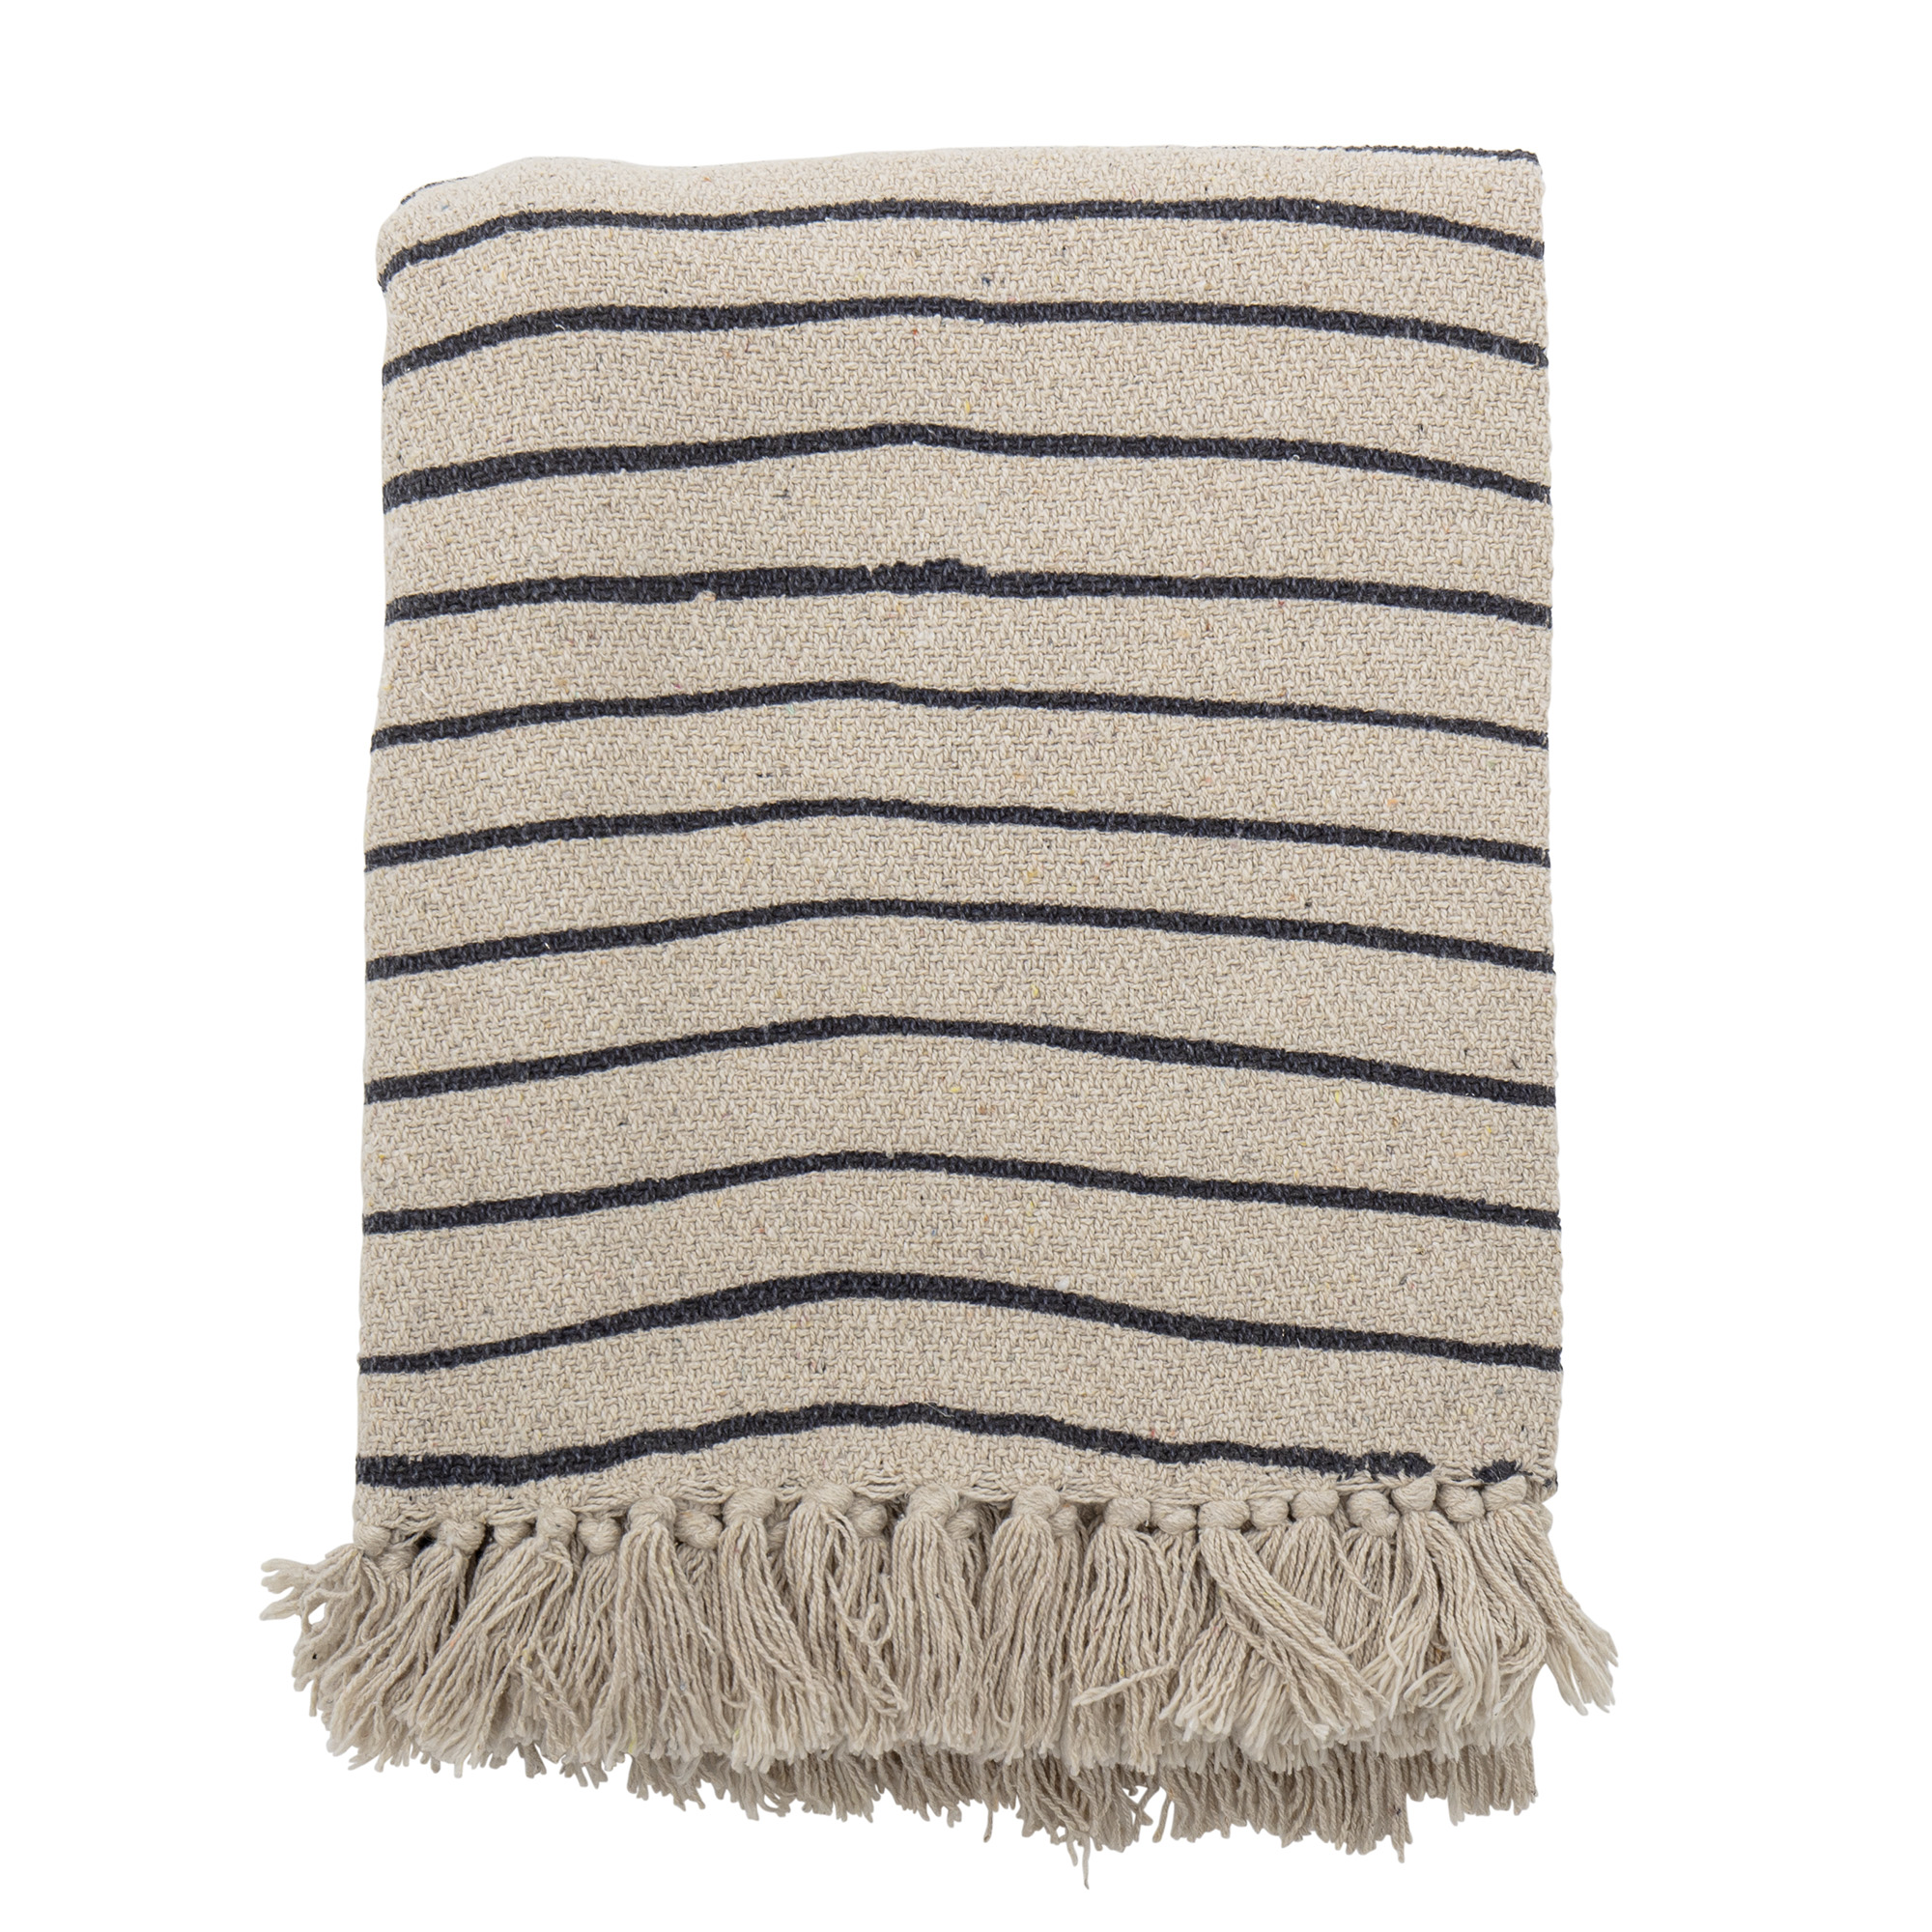 Bloomingville Natural Striped Recycled Cotton Eia Throw